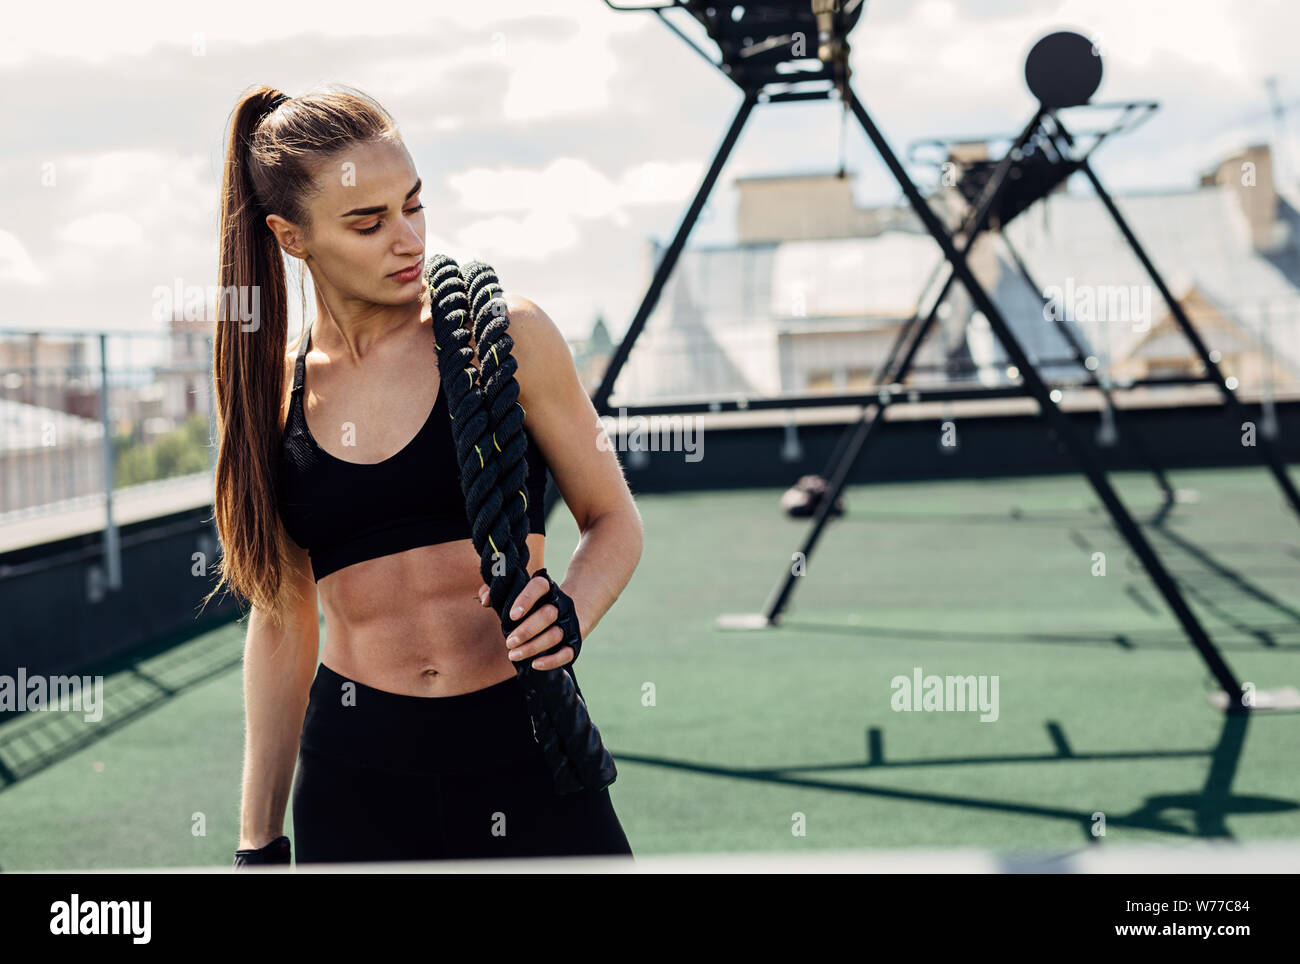 Woman looking down after intense physical training with battle ropes Stock Photo